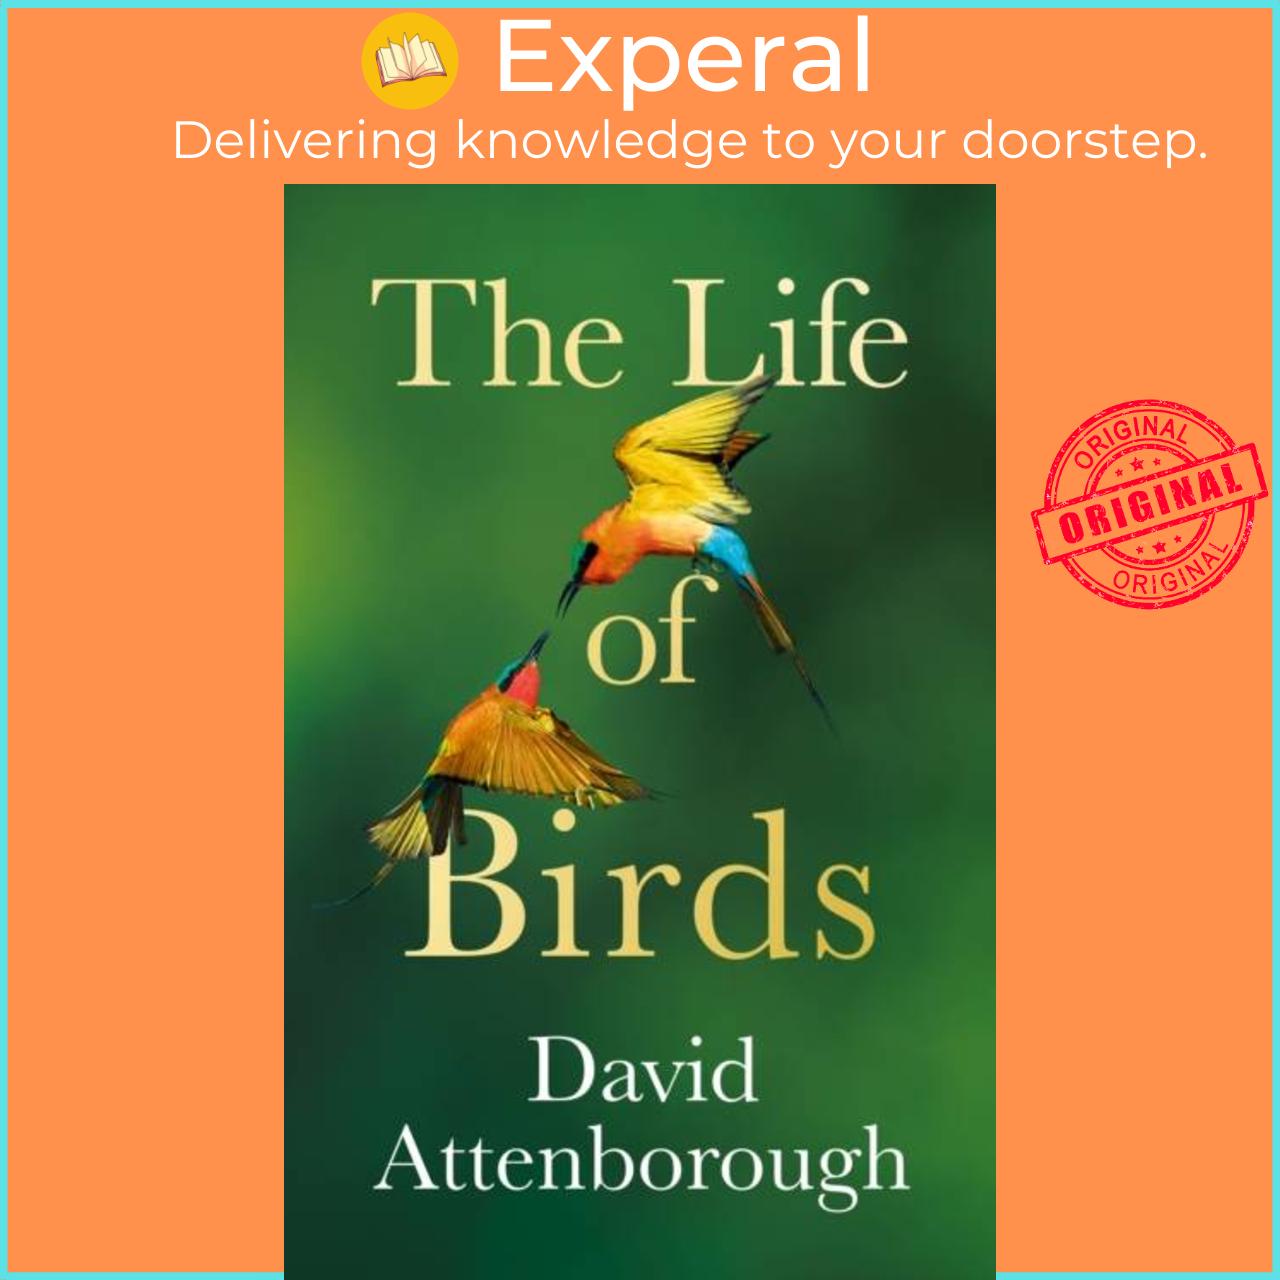 Sách - The Life of Birds by David Attenborough (UK edition, hardcover)